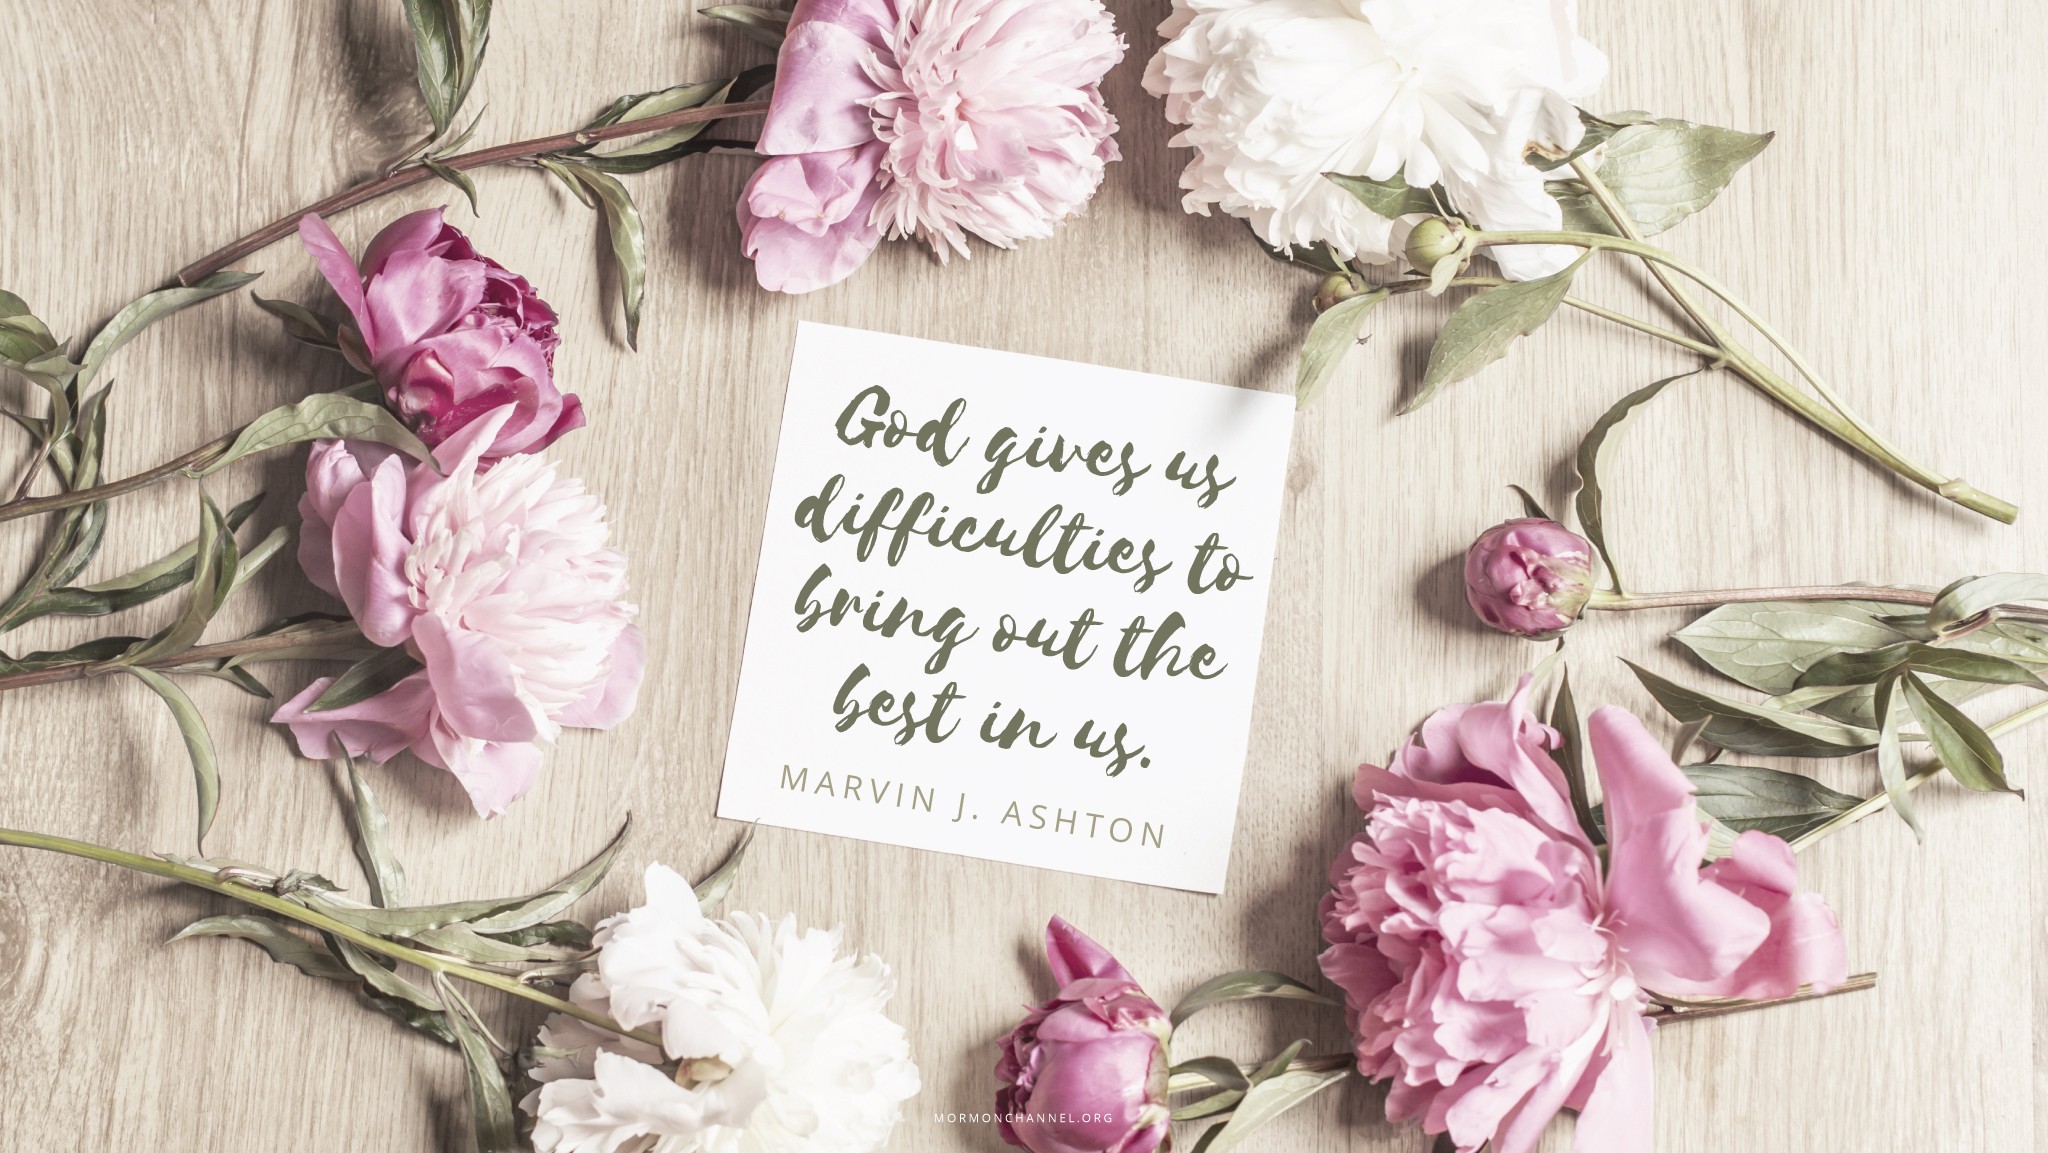 Pink flowers arranged around a note with a quote by Elder Marvin J. Ashton: “God gives us difficulties to bring out the best in us.”